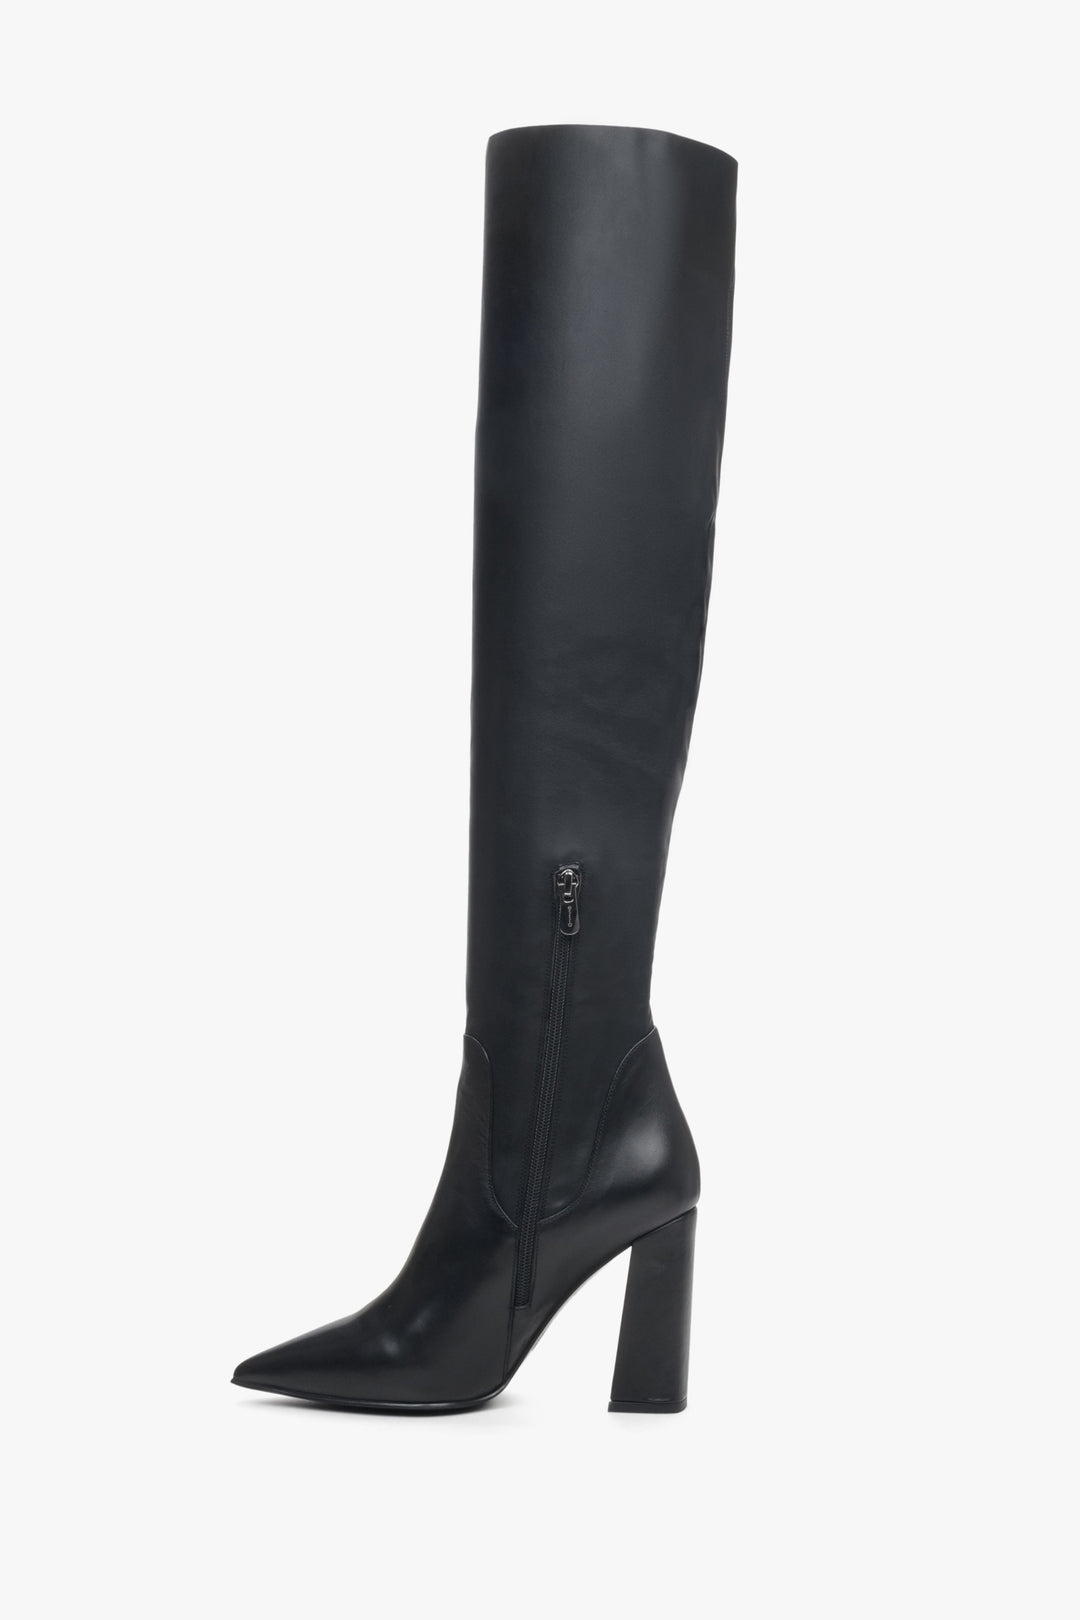 Women's pointed knee-high boots in black Estro - shoe profile.